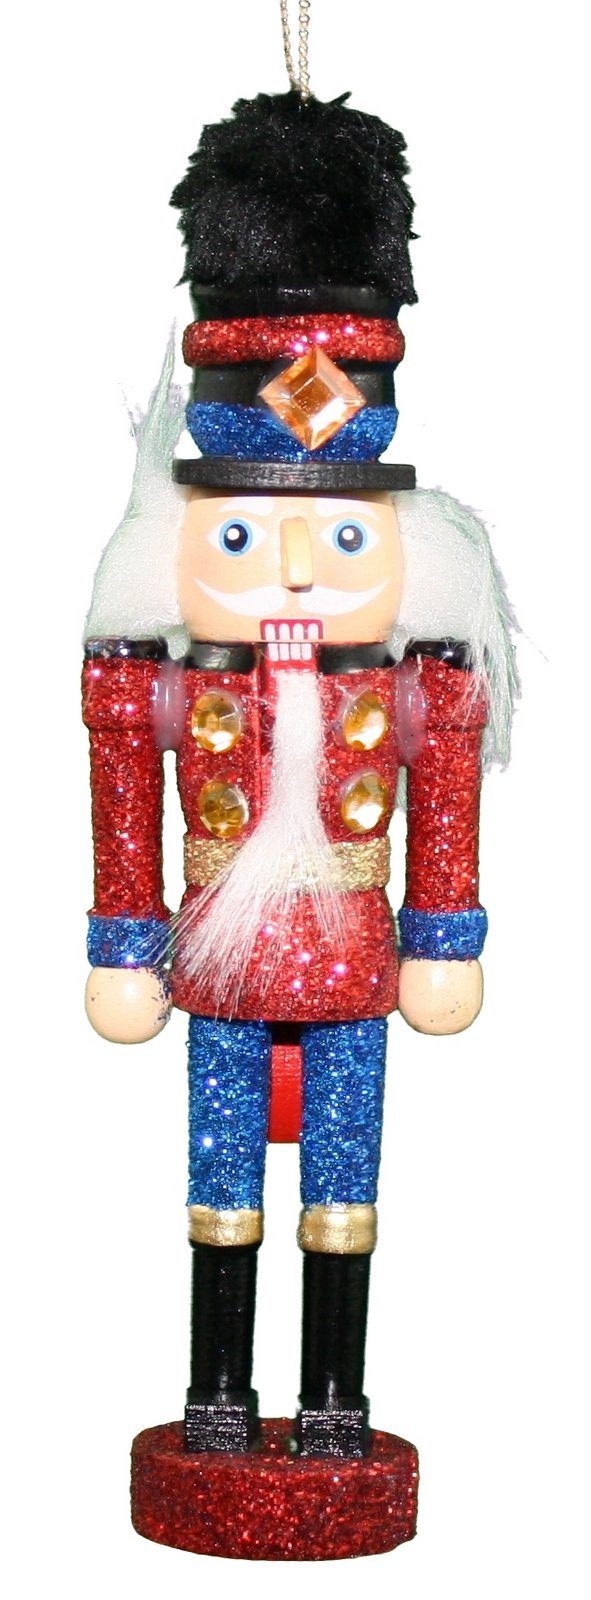 Hollywood 6 inch Wooden Nutcracker - Soldier - The Country Christmas Loft